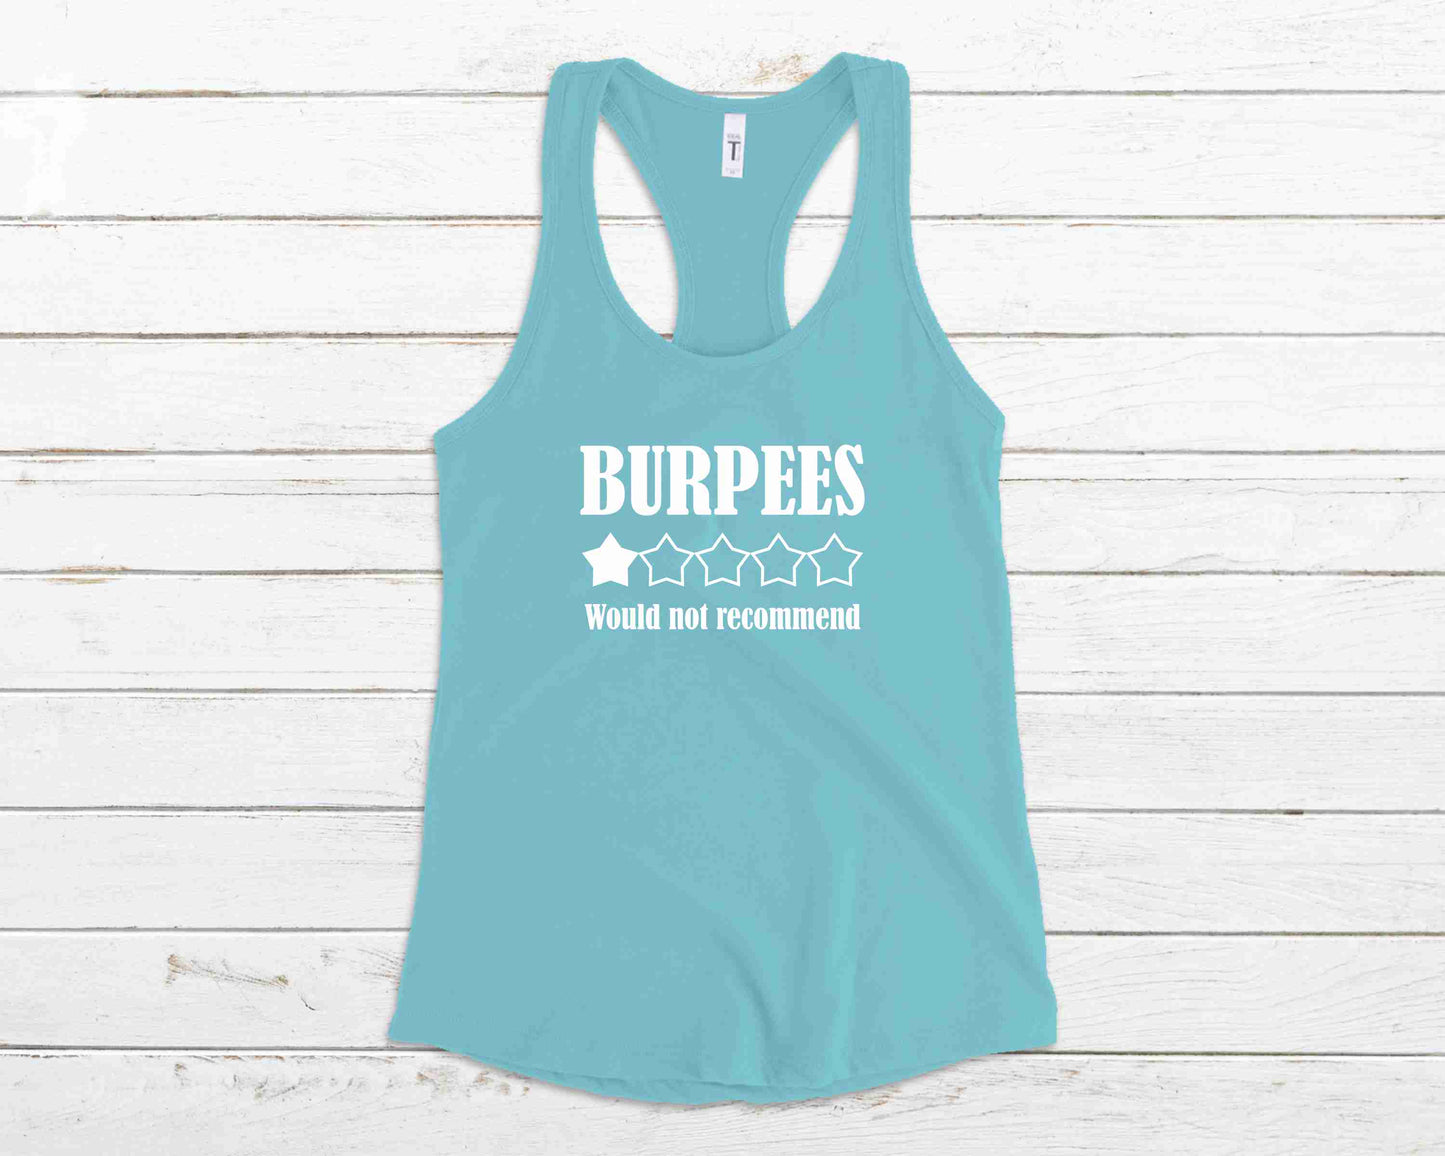 Burpees - Would Not Recommend Apparel